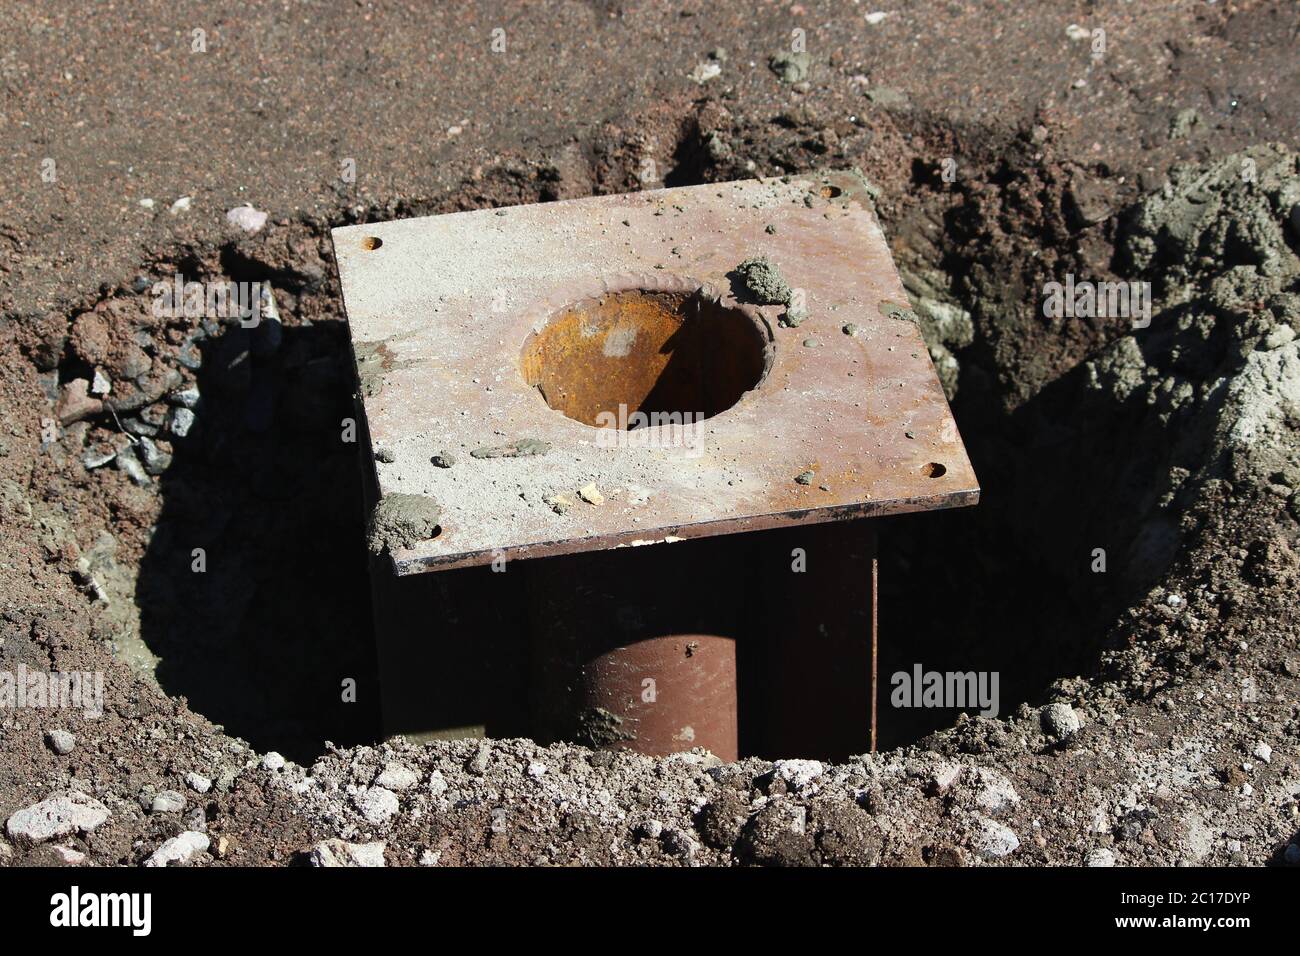 Metal element of the foundation of the support for fixing the traffic light near the road Stock Photo